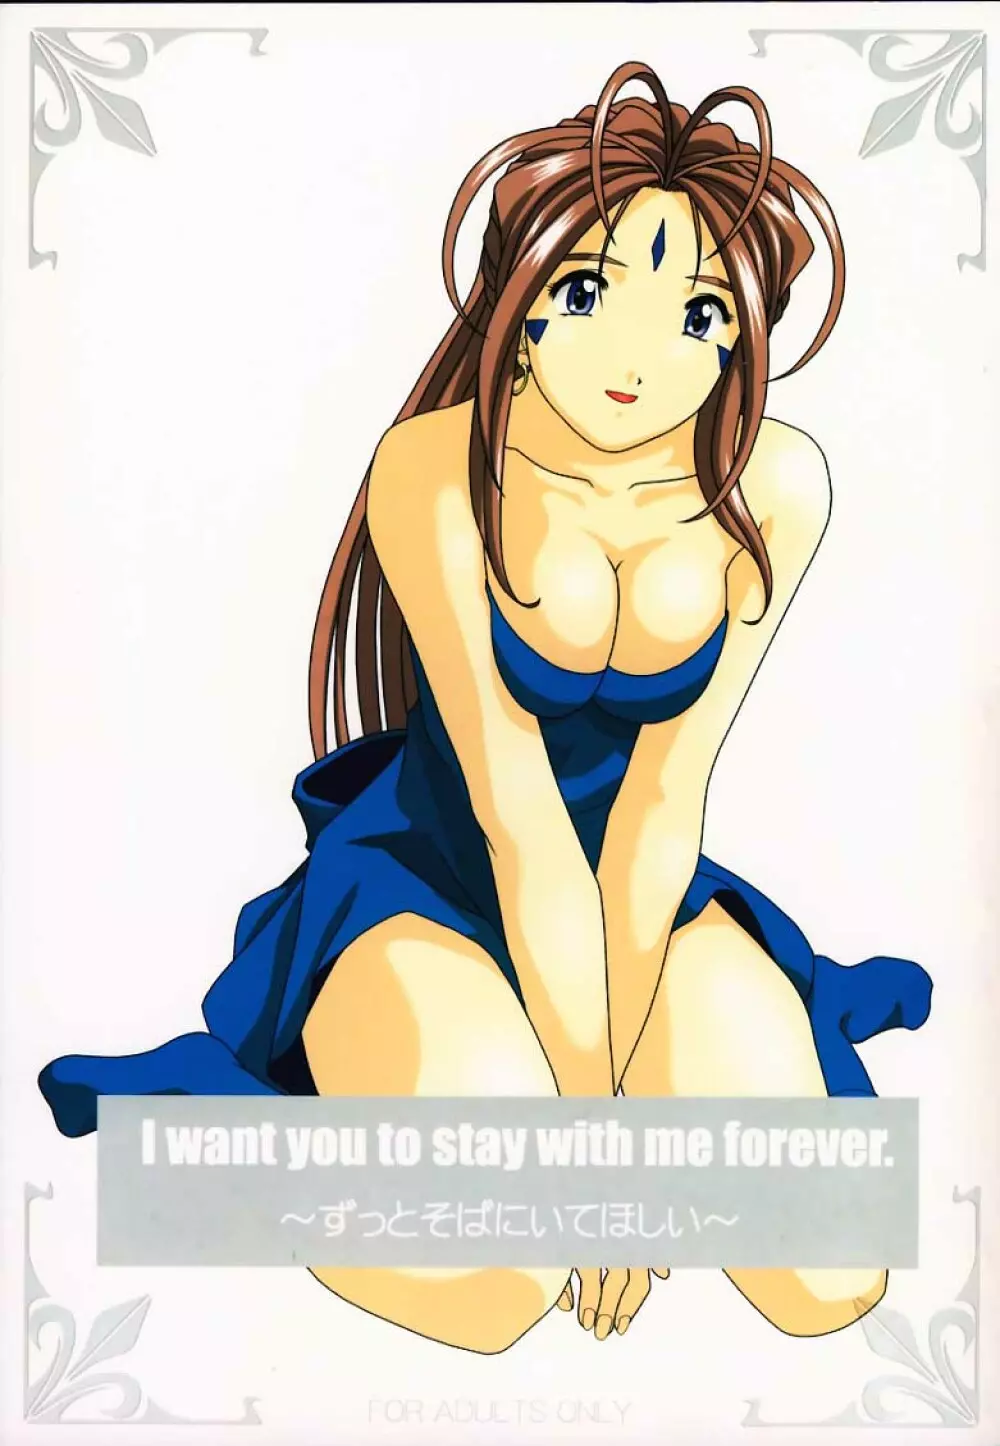 I want you to stay with me forever. ～ずっとそばにいてほしい～